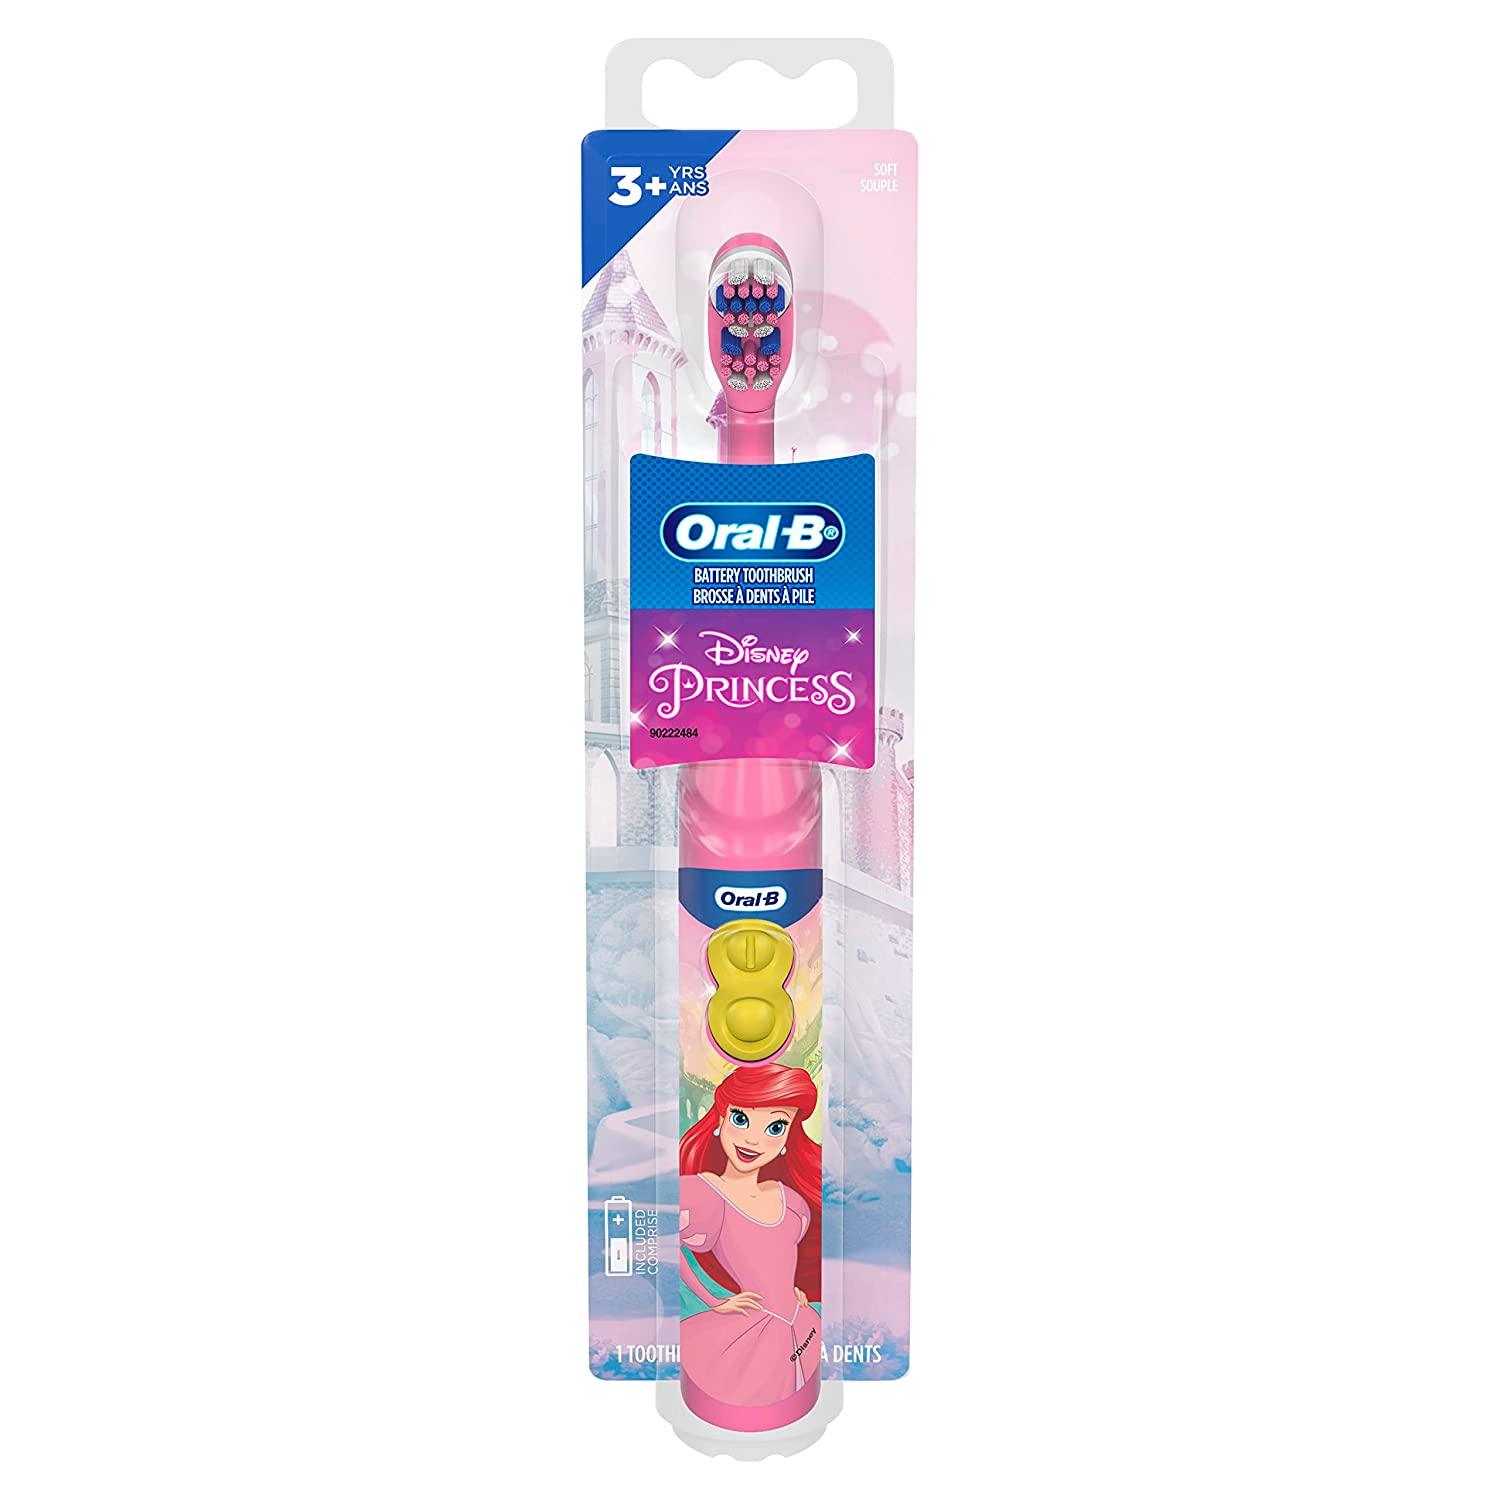 Oral-B Kid's Battery Toothbrush Featuring Disney's Little Mermaid, Soft Bristles - BumbleToys - 5-7 Years, Baby Saftey & Health, Girls, Oral-B, Pre-Order, Toothbrush